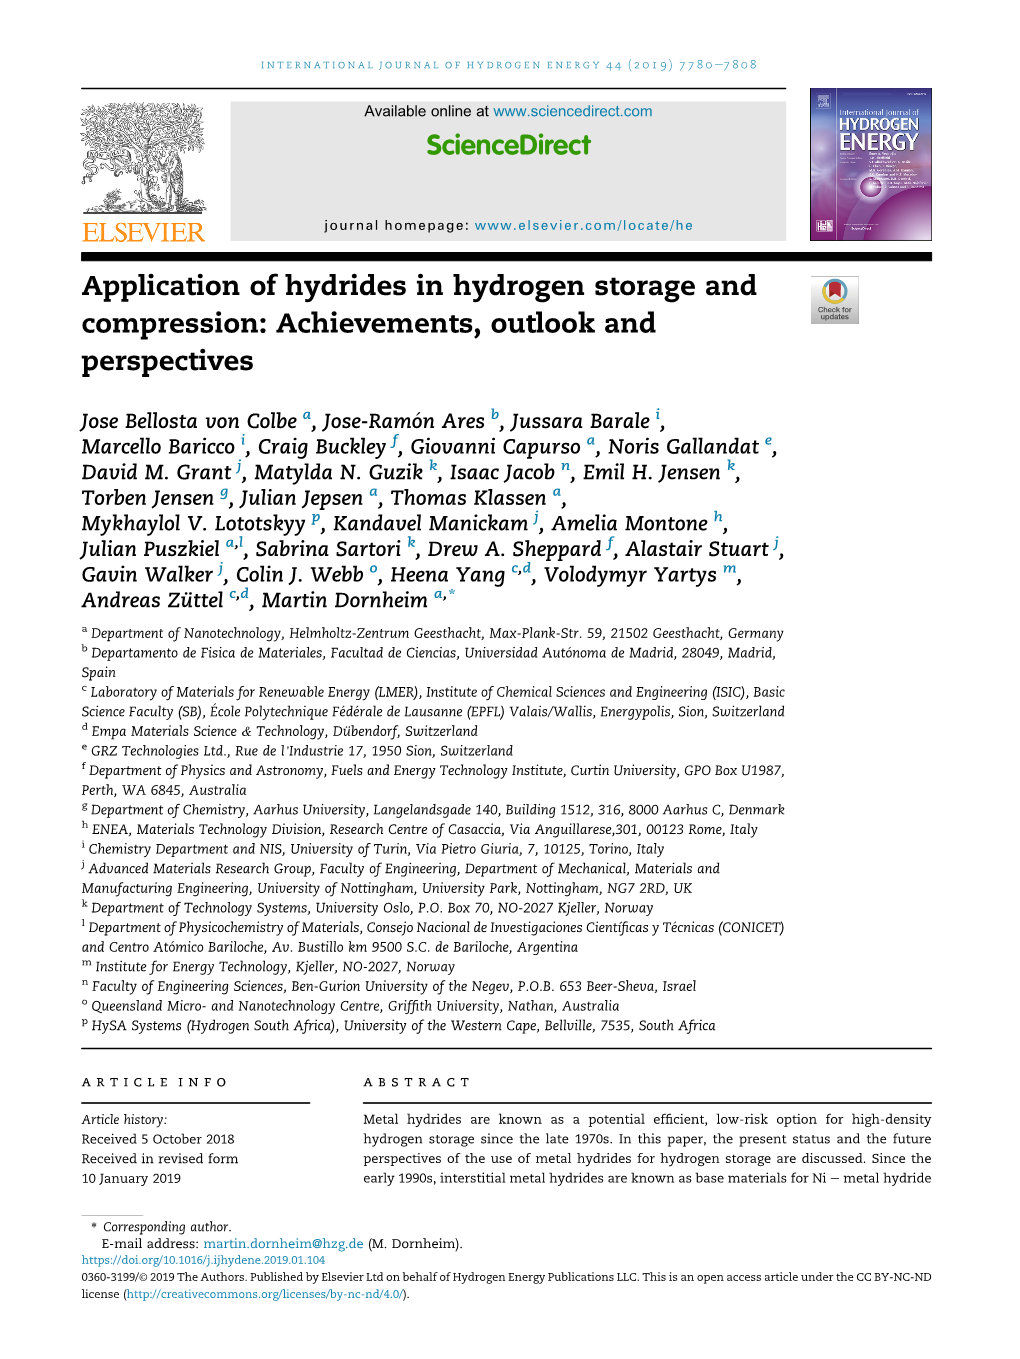 Application of Hydrides in Hydrogen Storage and Compression: Achievements, Outlook and Perspectives